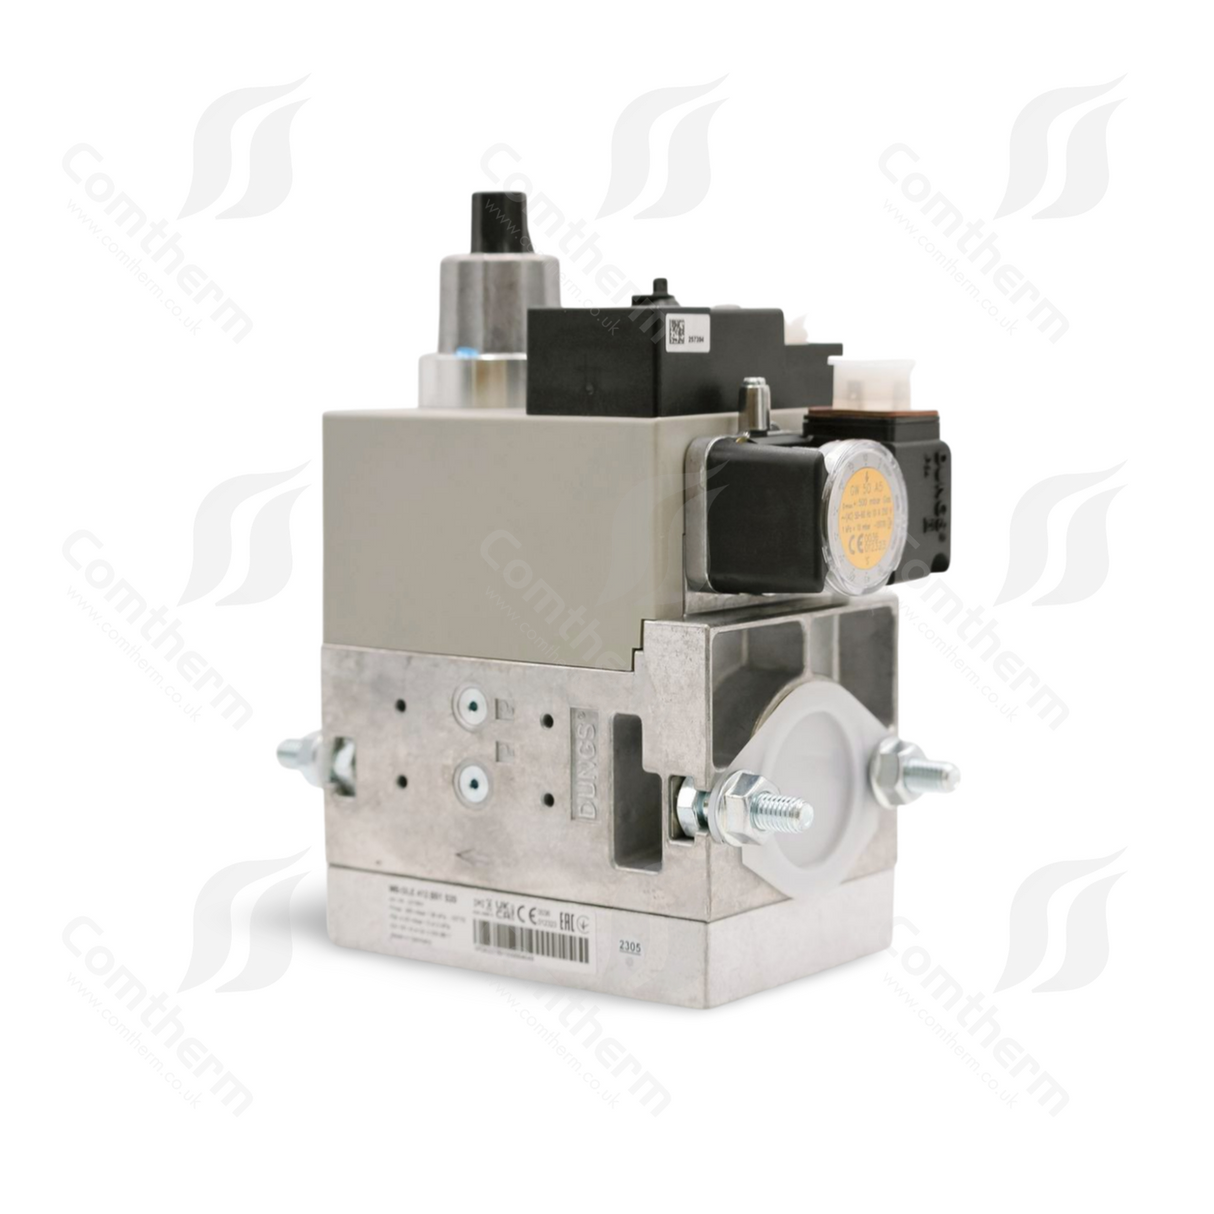 Dungs MB-DLE 412 B07 S20 + GW150A5 Multibloc Gas Valve - 110v